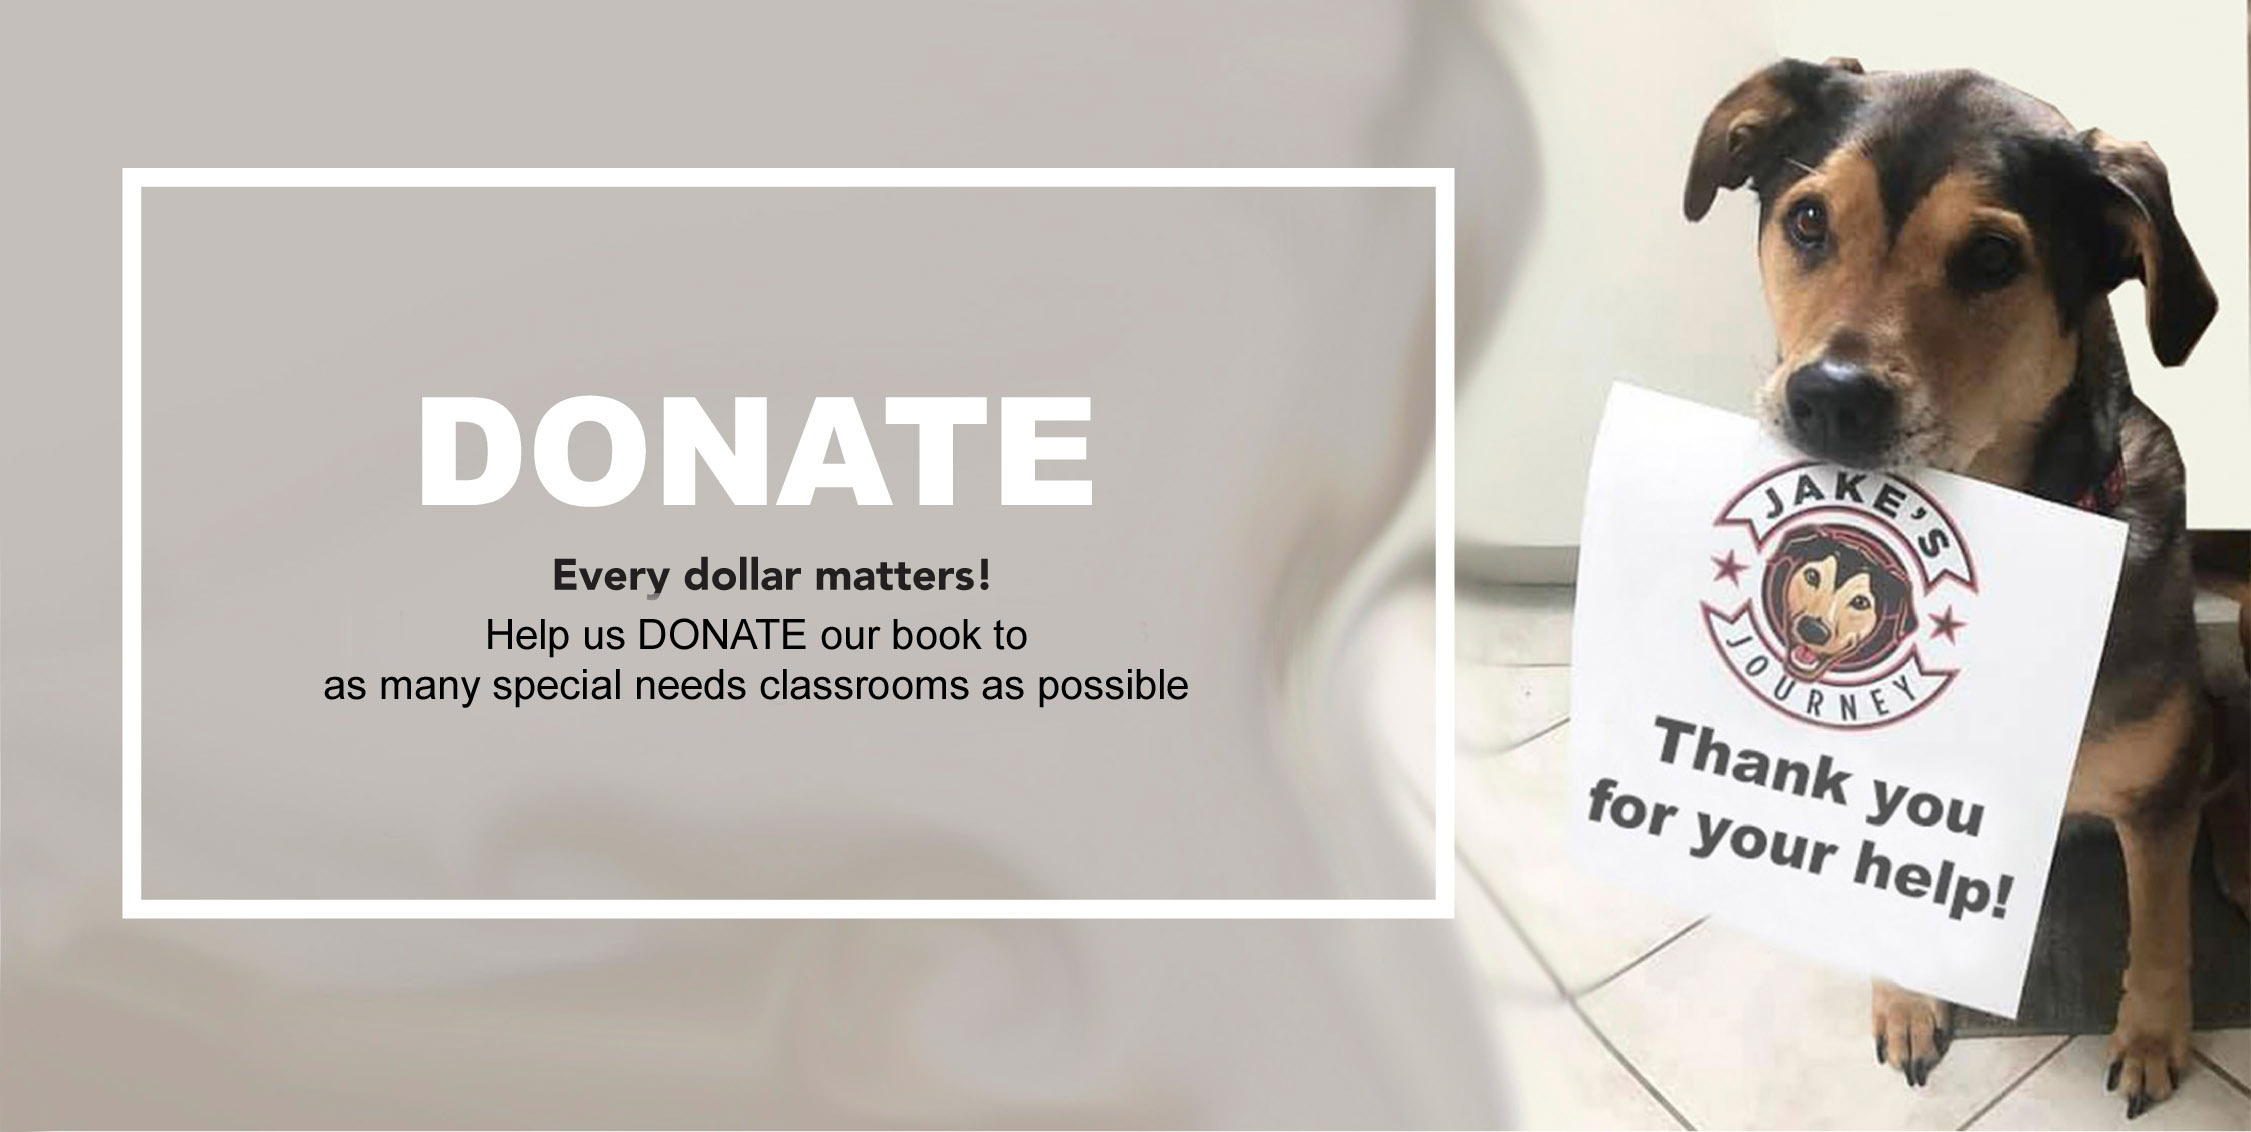 DONATE - Every dollar matters! Help us DONATE our book to as many special needs classrooms as possible.